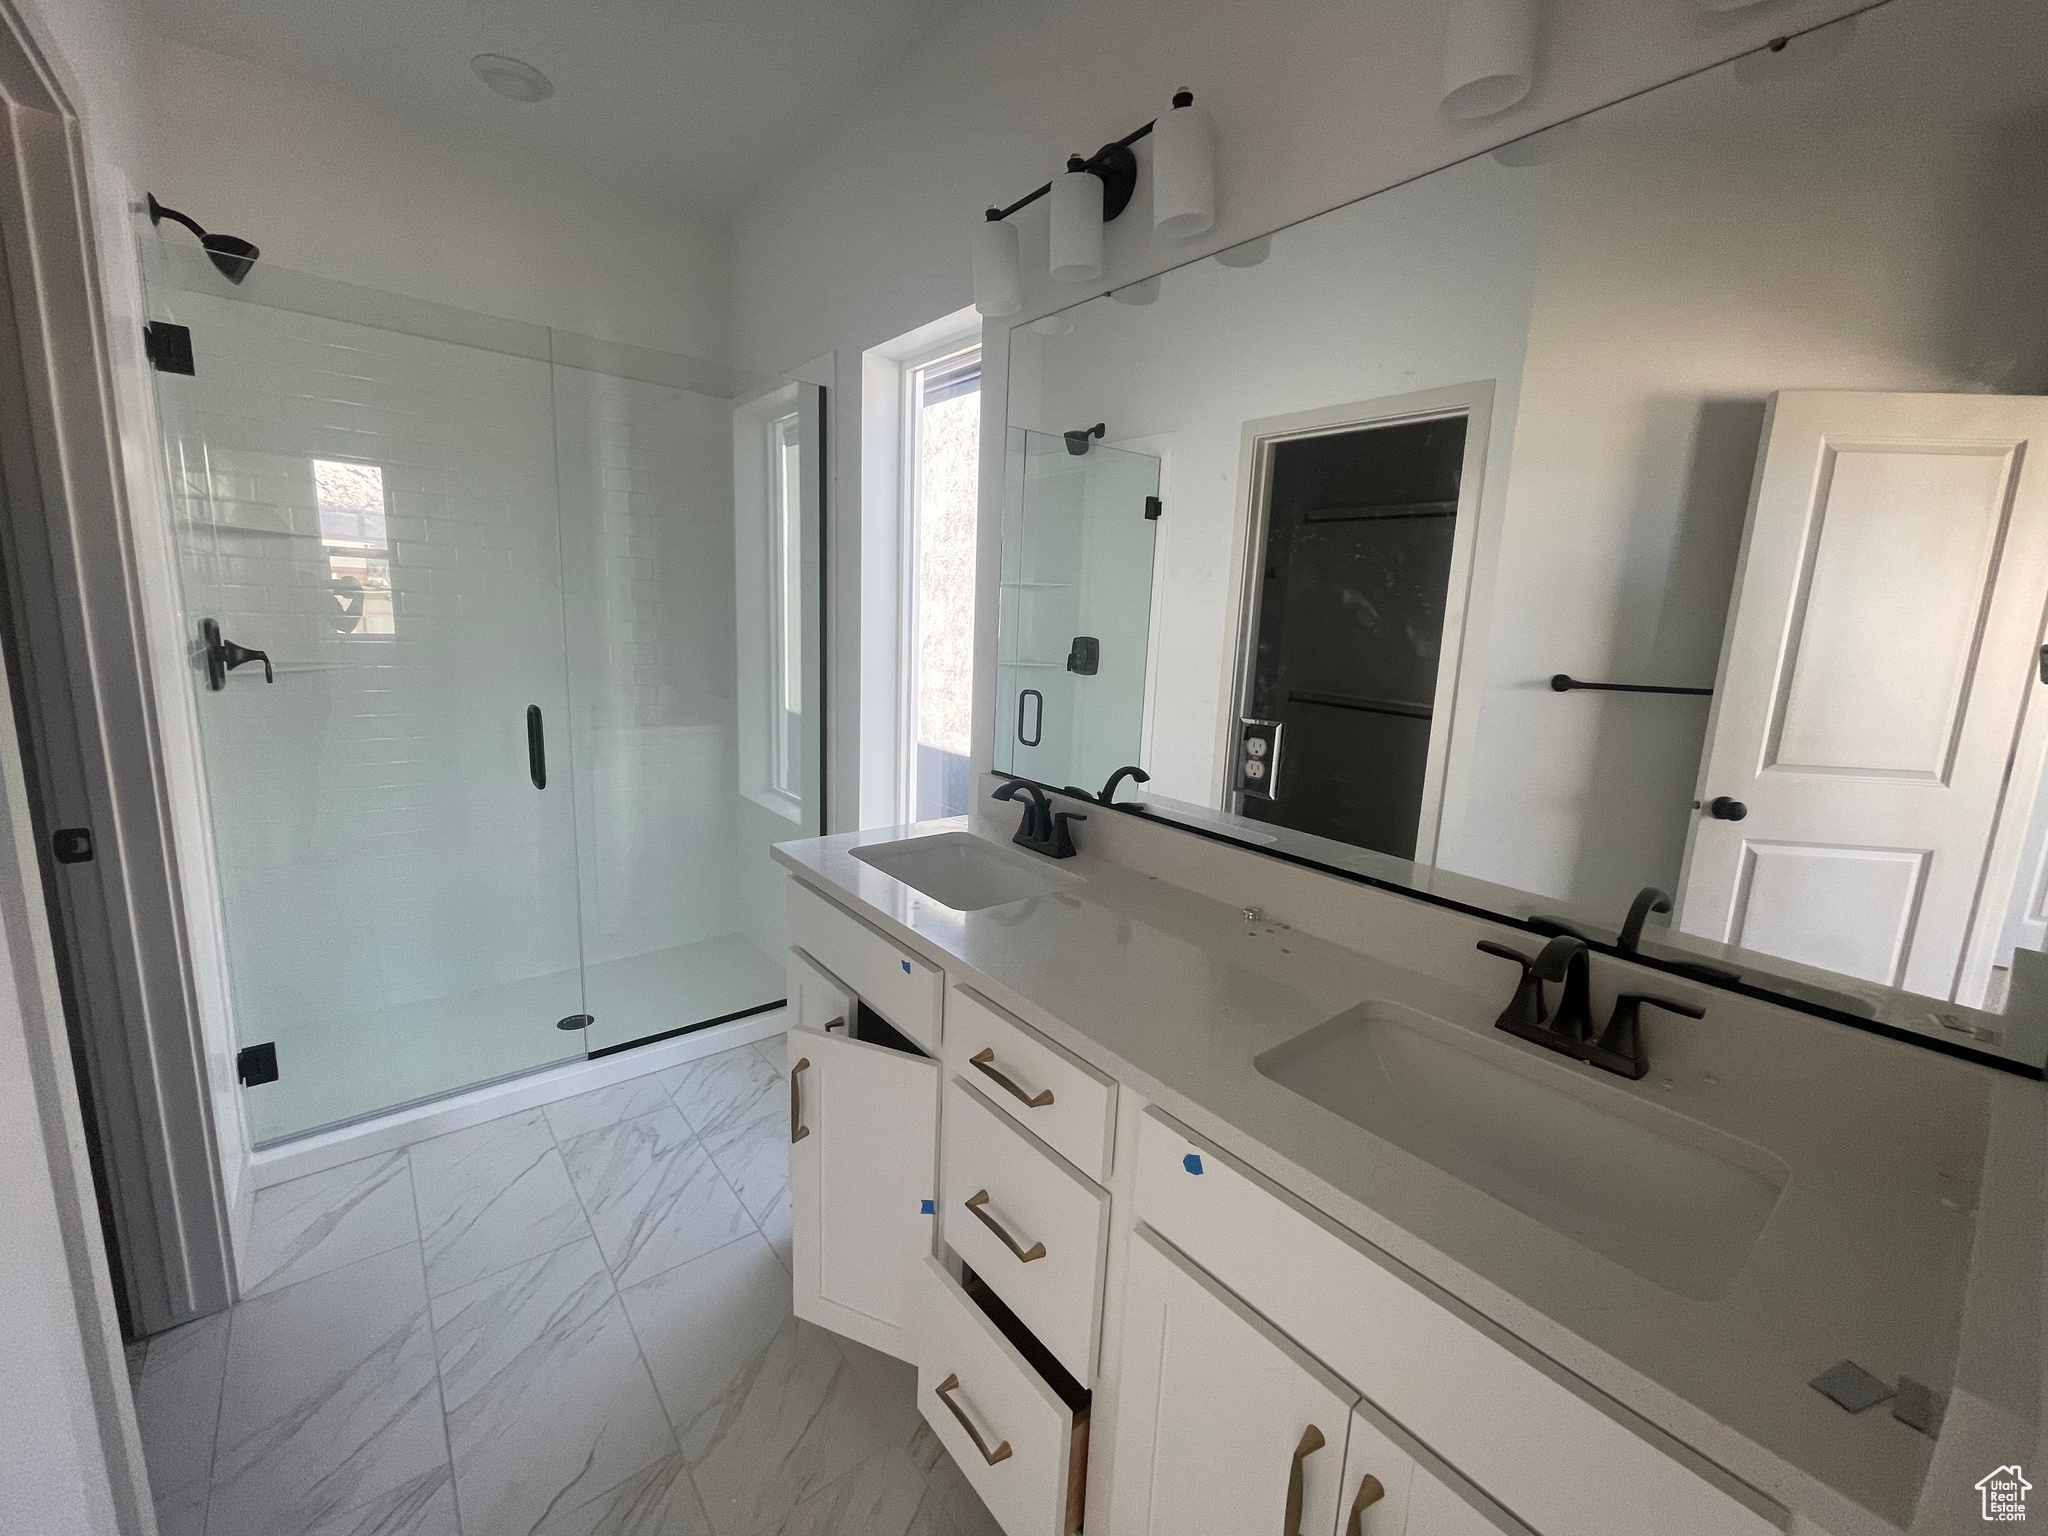 Bathroom with a shower with shower door, tile floors, and double vanity